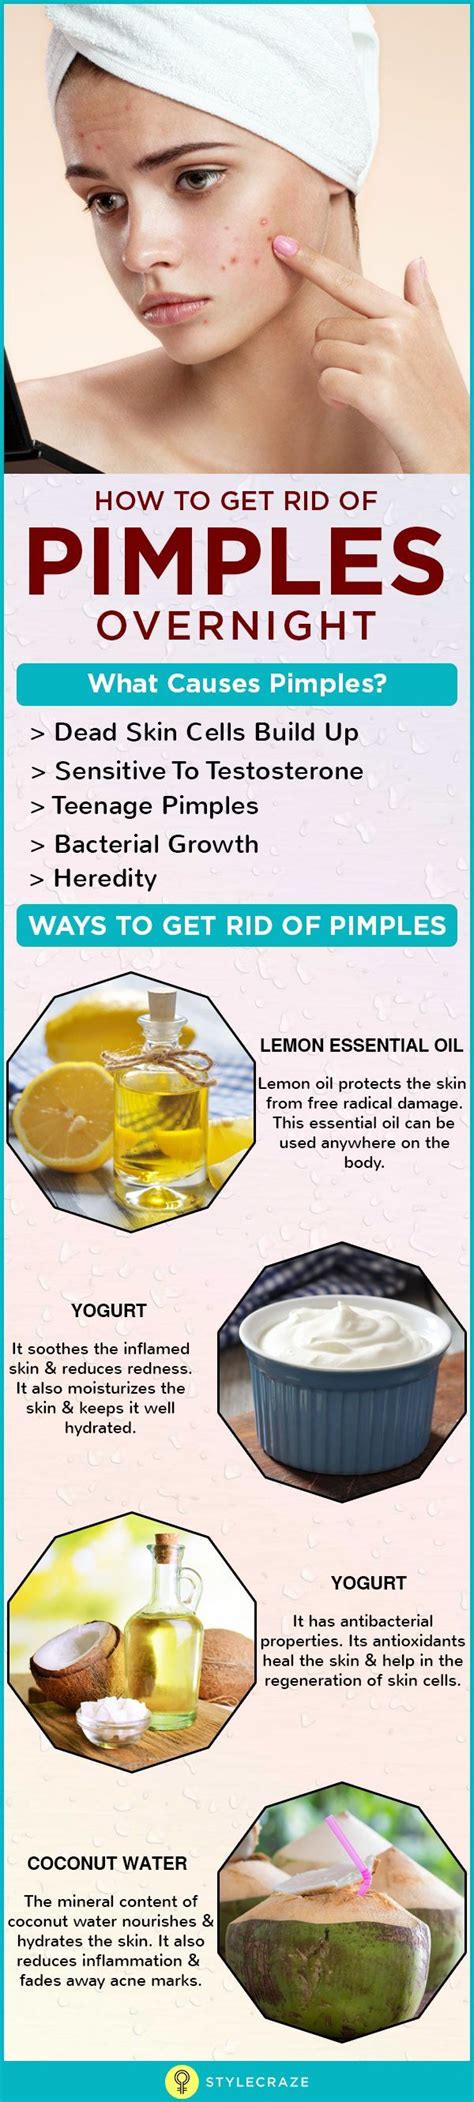 How To Get Rid Of Pimples Acne Overnight Fast Are Pimples Robbing Your